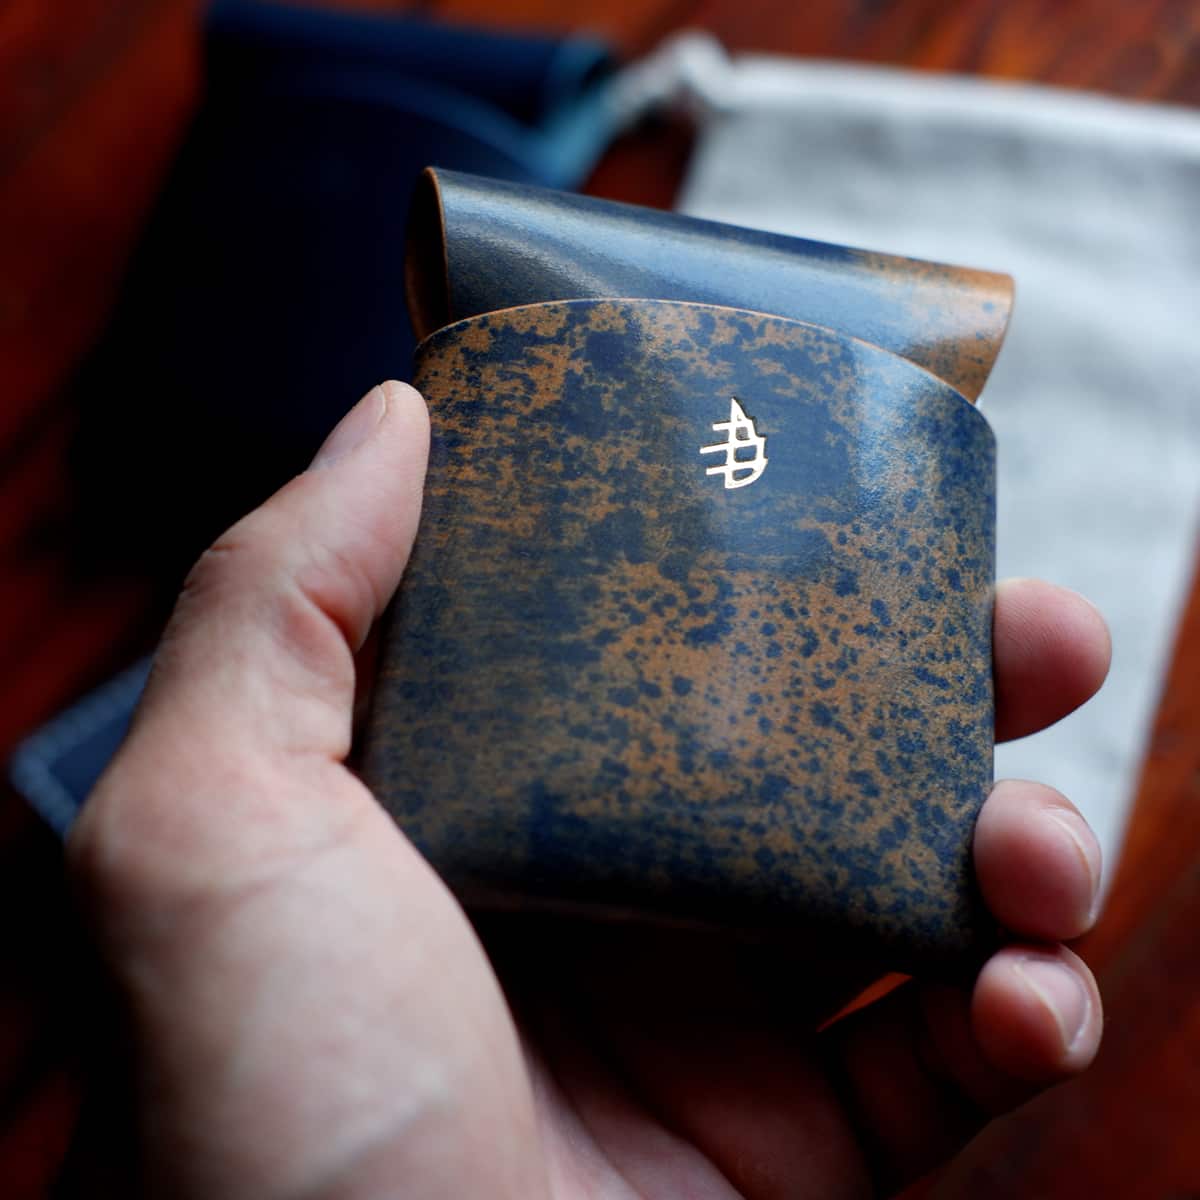 The Lodgepole Stitchless Wallet in Blue Rothko Shell Cordovan leather held in hand